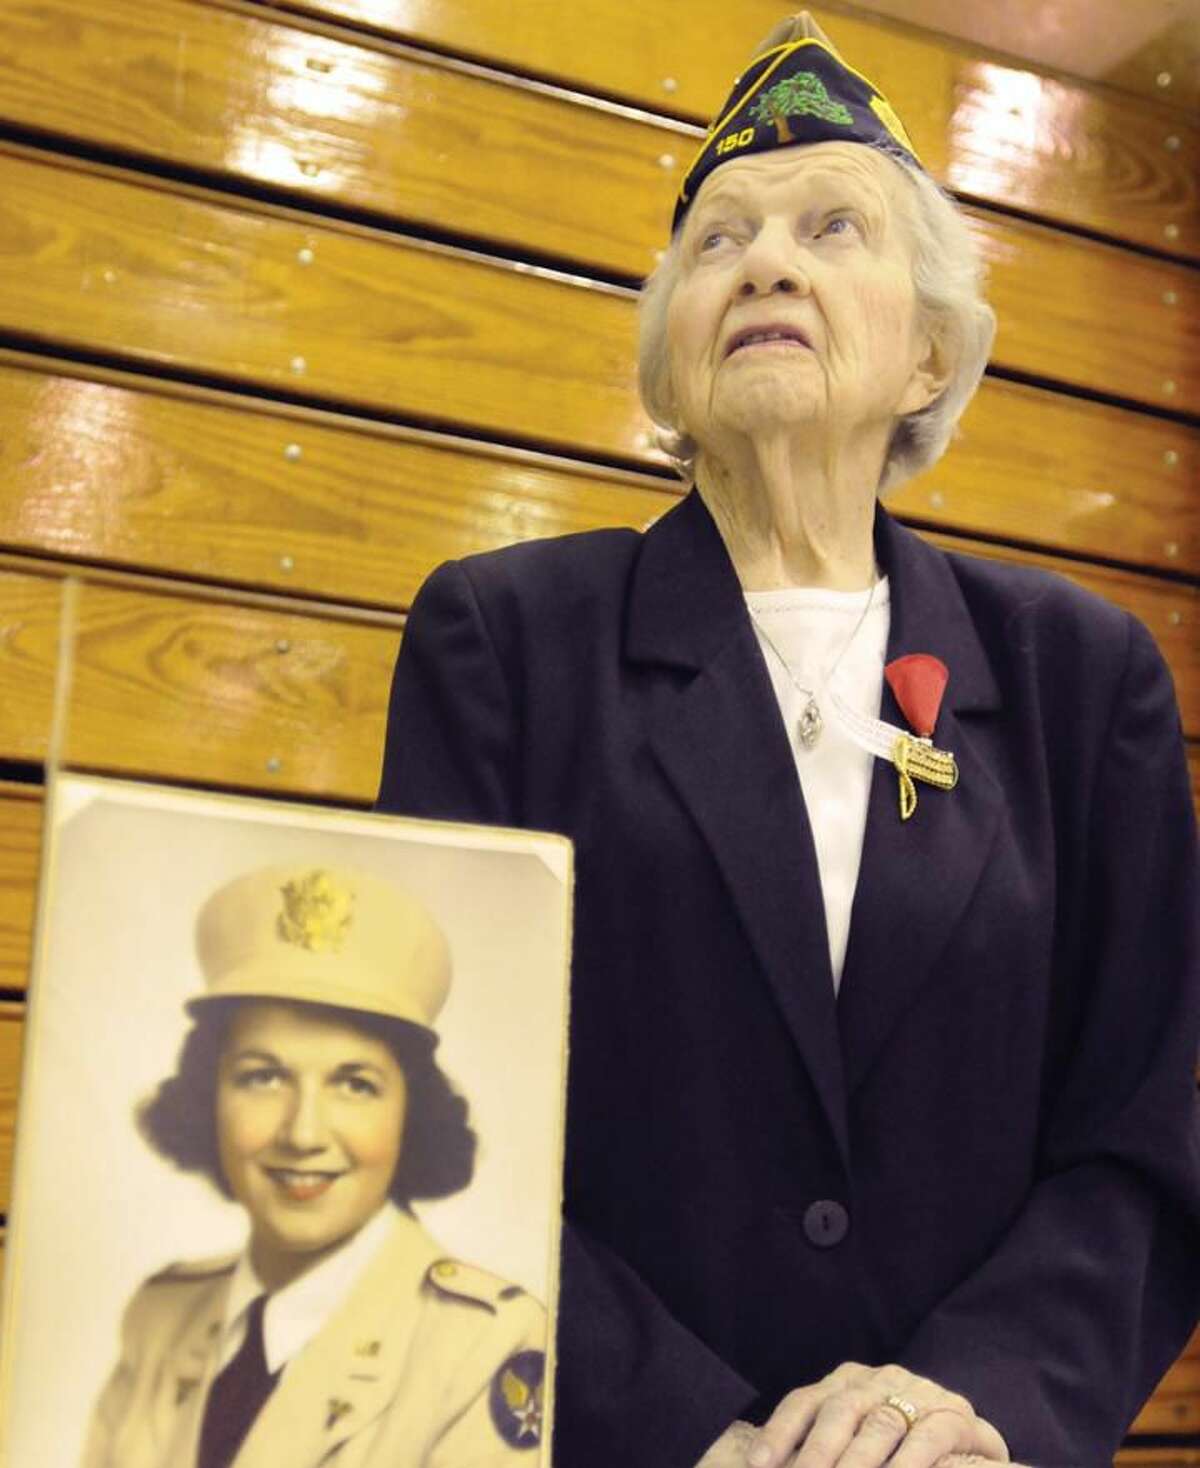 World War II Army Nurse Florence Donovan Krukowski of Hamden, 90, a past Commander of American Legion Post 150 stands ready to talk to over 450 Hamden middle and high school students who were bused to the Hamden Veterans Awareness Day at Quinnipiac University Friday May 24, 2013, a Hamden Veterans Commission sponsored Memorial Day event which was dedicated to the memory of all of America's Veterans. With tributes and presentation by speakers, the students also viewed Veteran's exhibits from different wars and historical eras of the United States. The event also gave students the opportunity to interact with Veterans from World War II to the present War on Terror. Photo by Peter Hvizdak / New Haven Register.